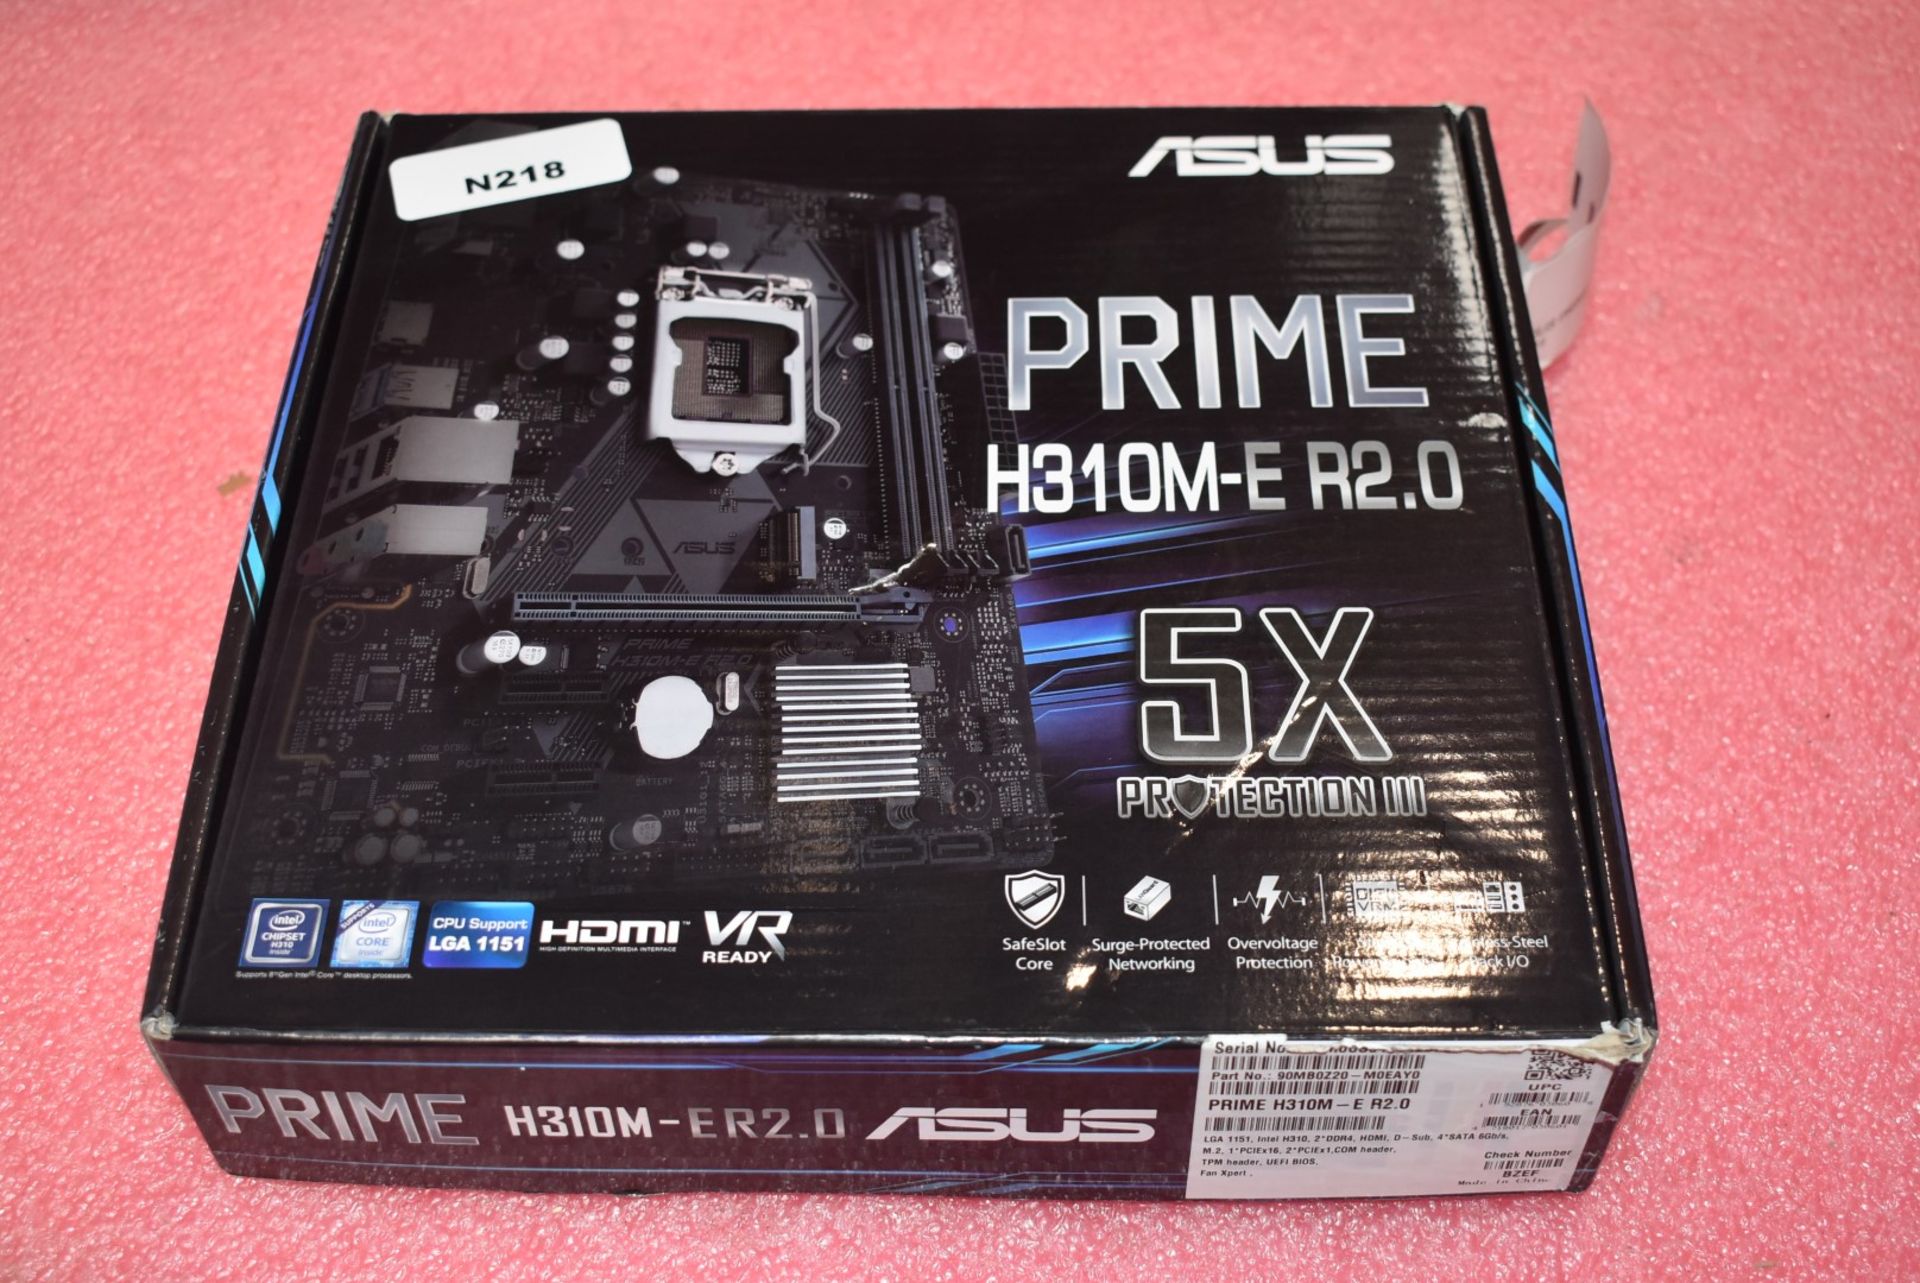 1 x Asus Prime H310M-E Intel LGA1151 Motherboard - Boxed With Accessories - Image 2 of 5